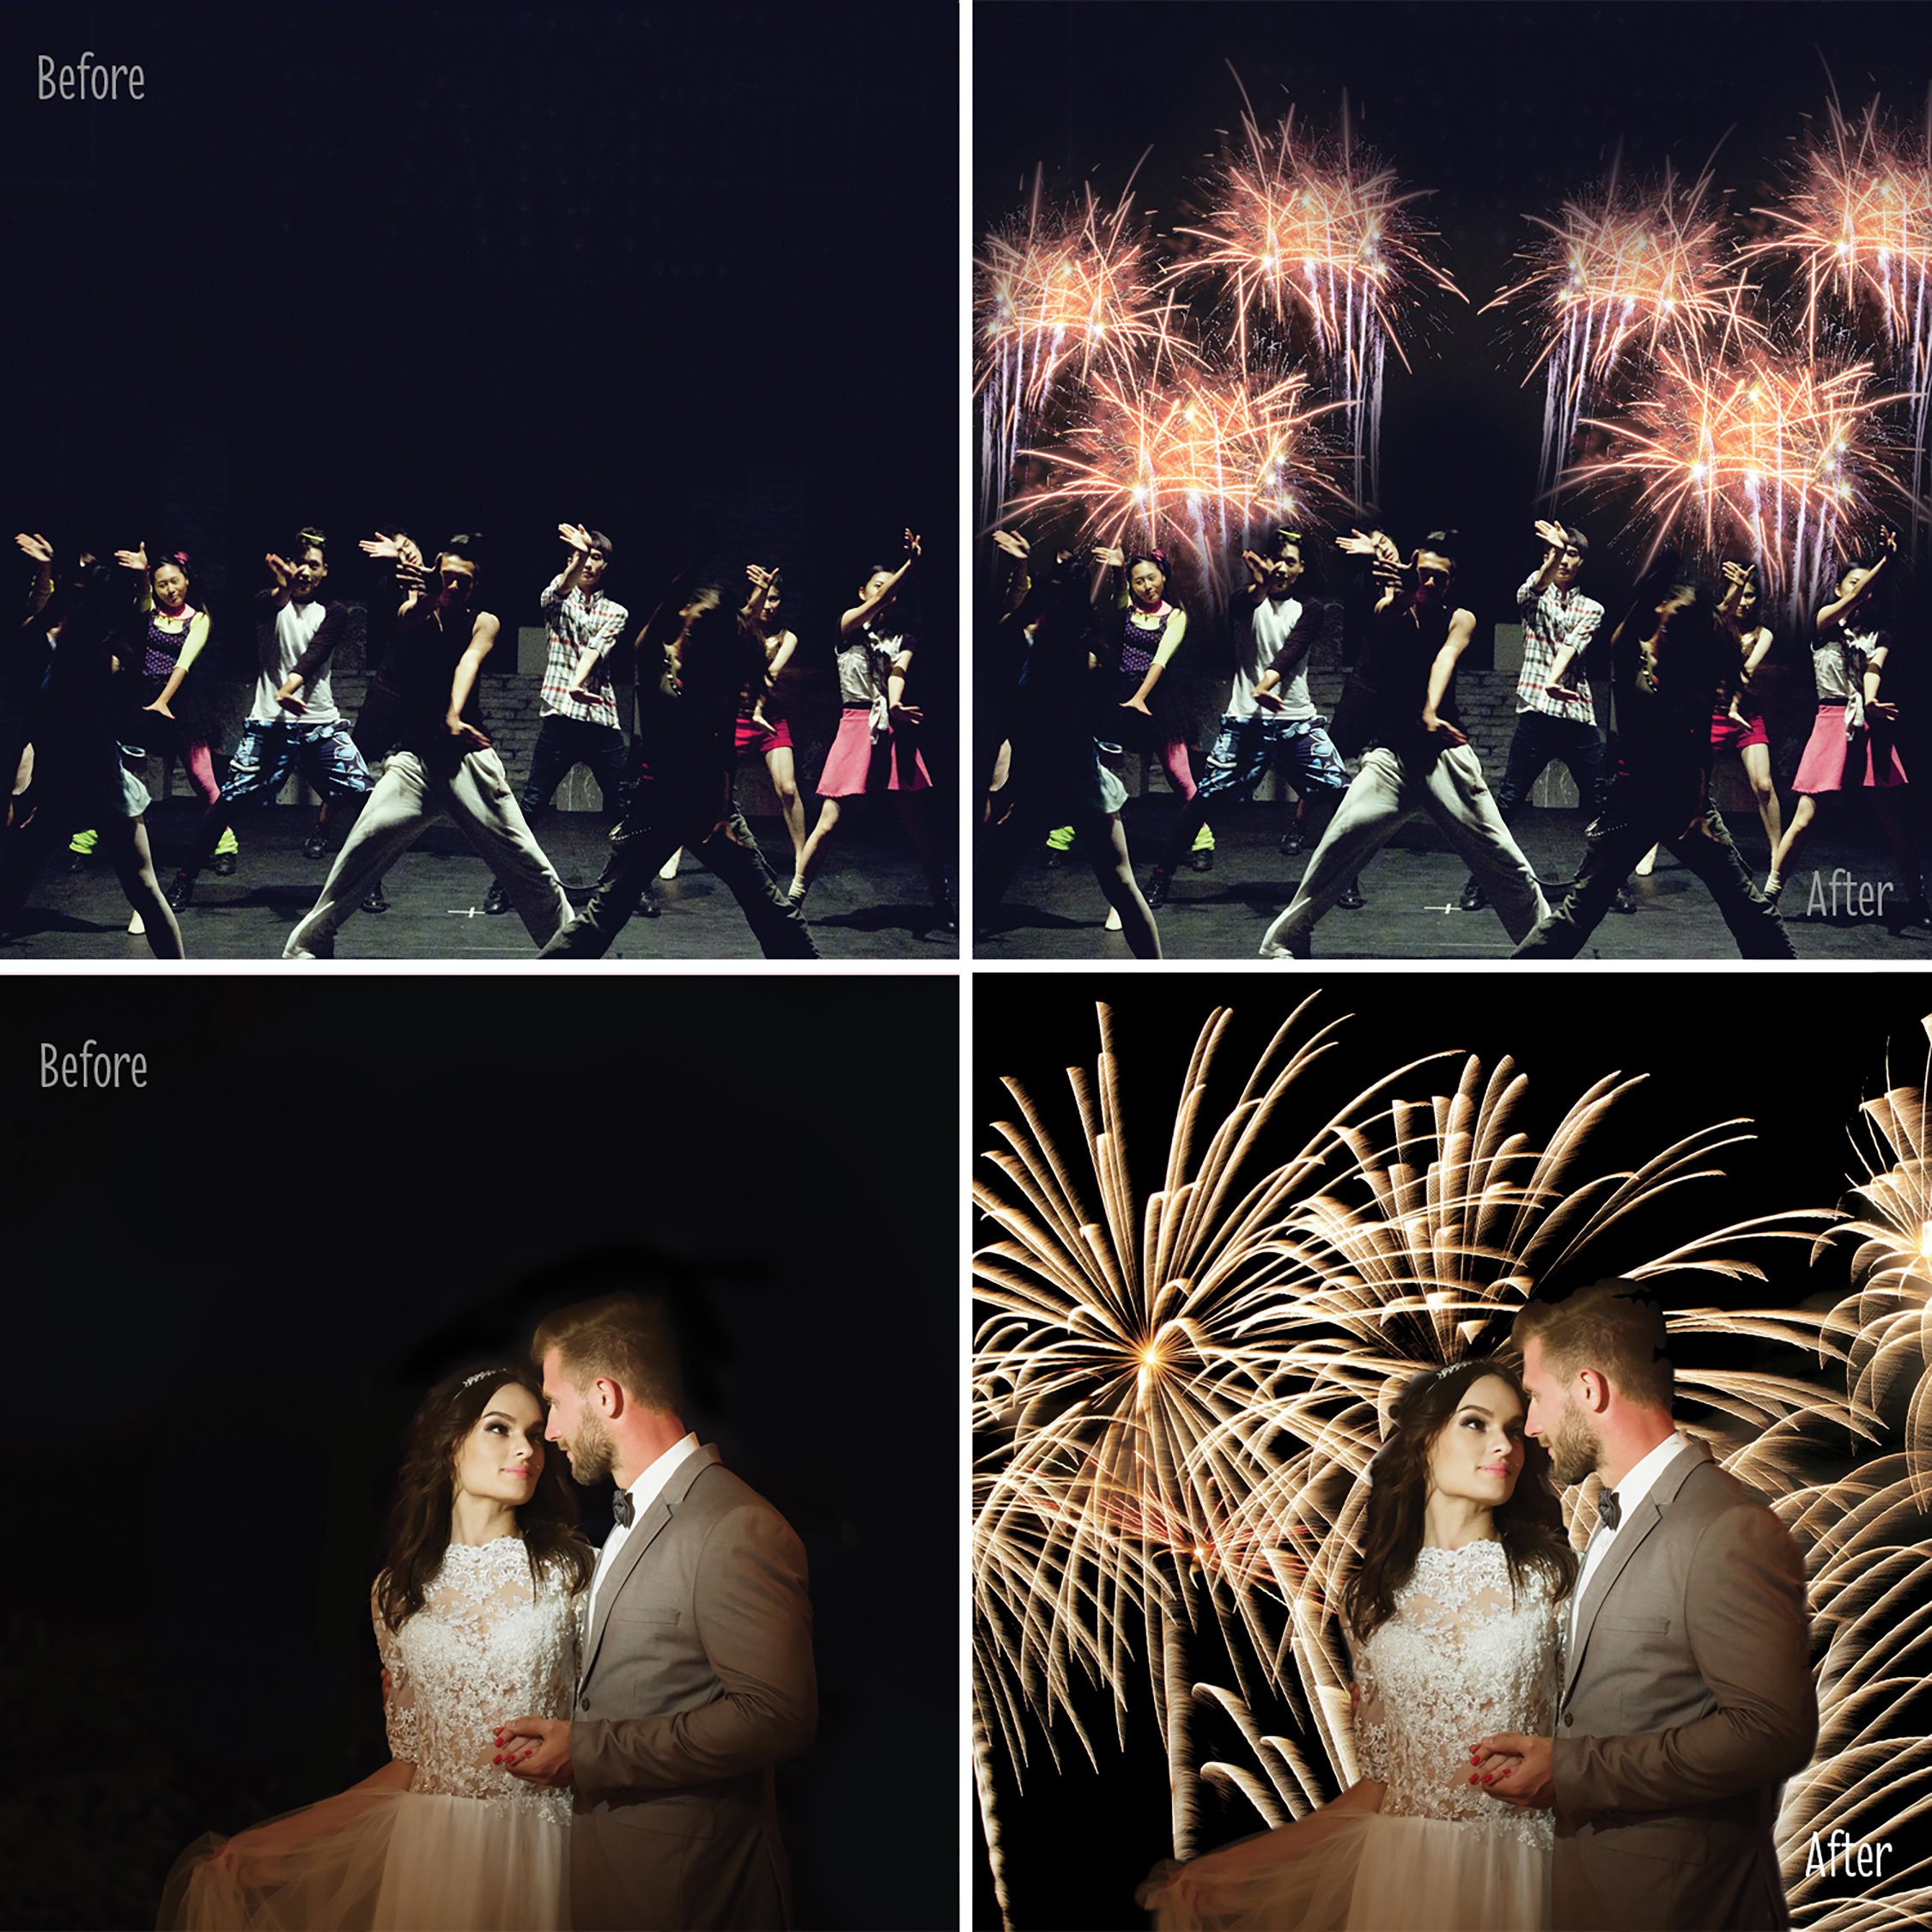 photo.overlays.fireworks.display.before.after .2 45